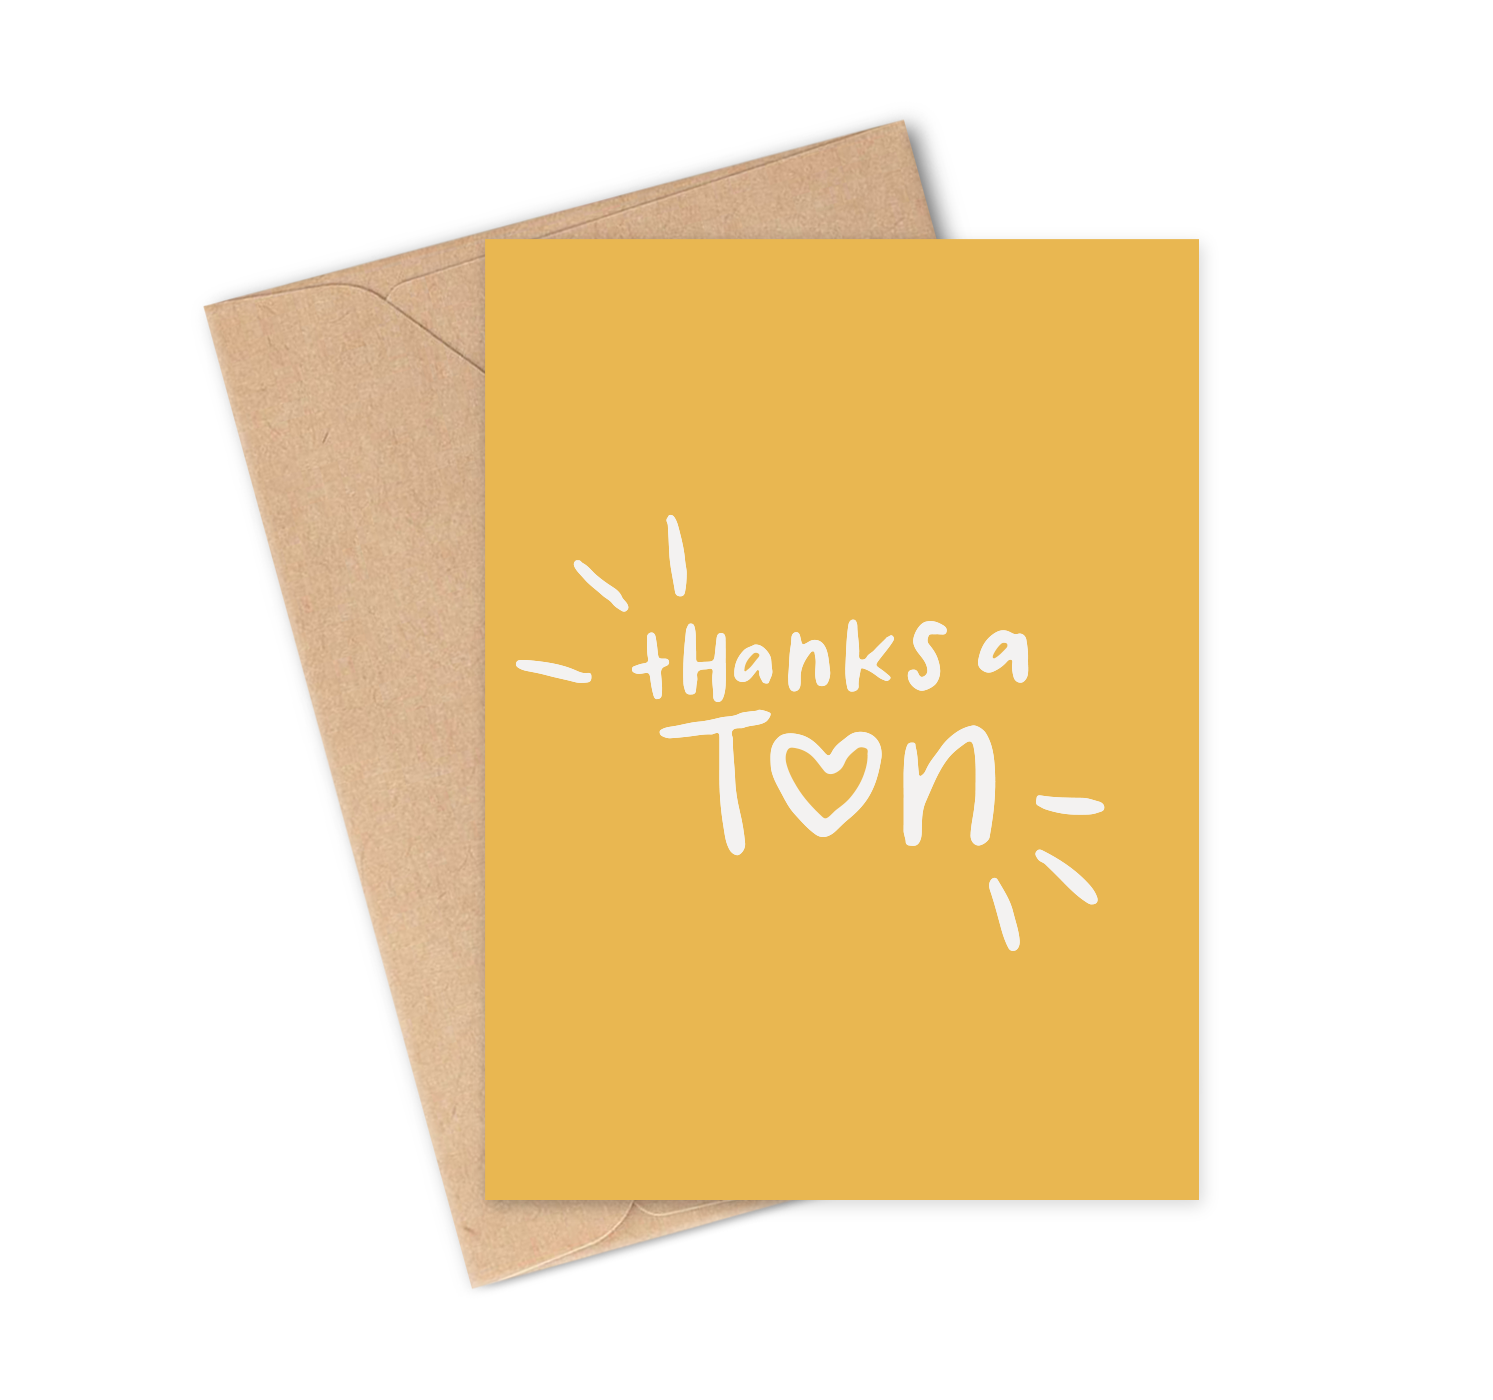 Thanks a ton greeting card with envelope